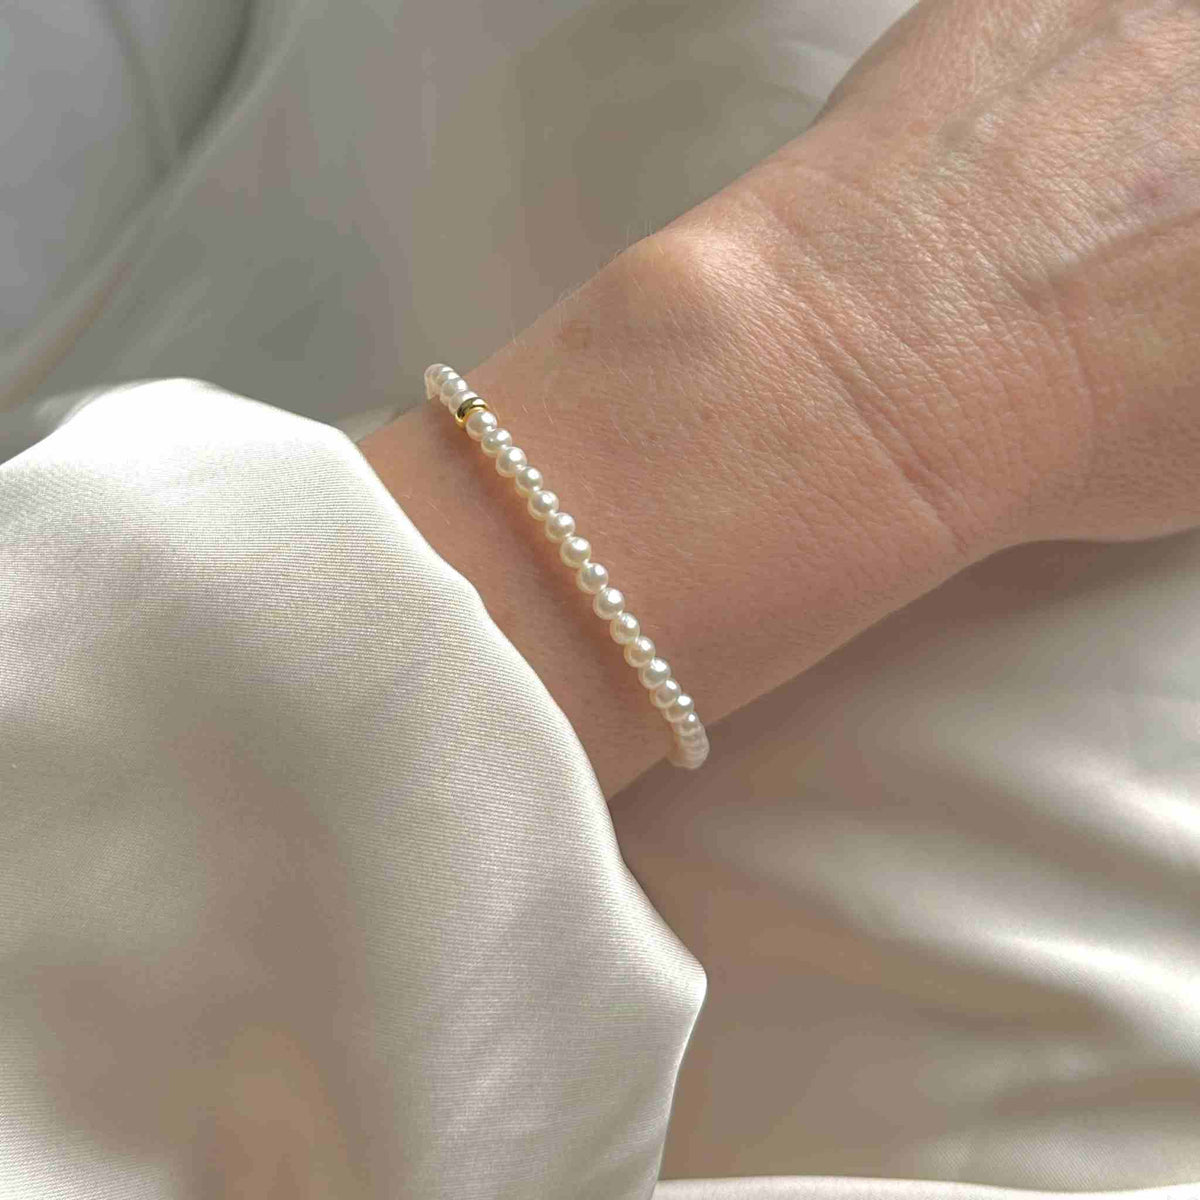 Small round pearl bracelet gold accent modelled on wrist with cream silk wedding dress